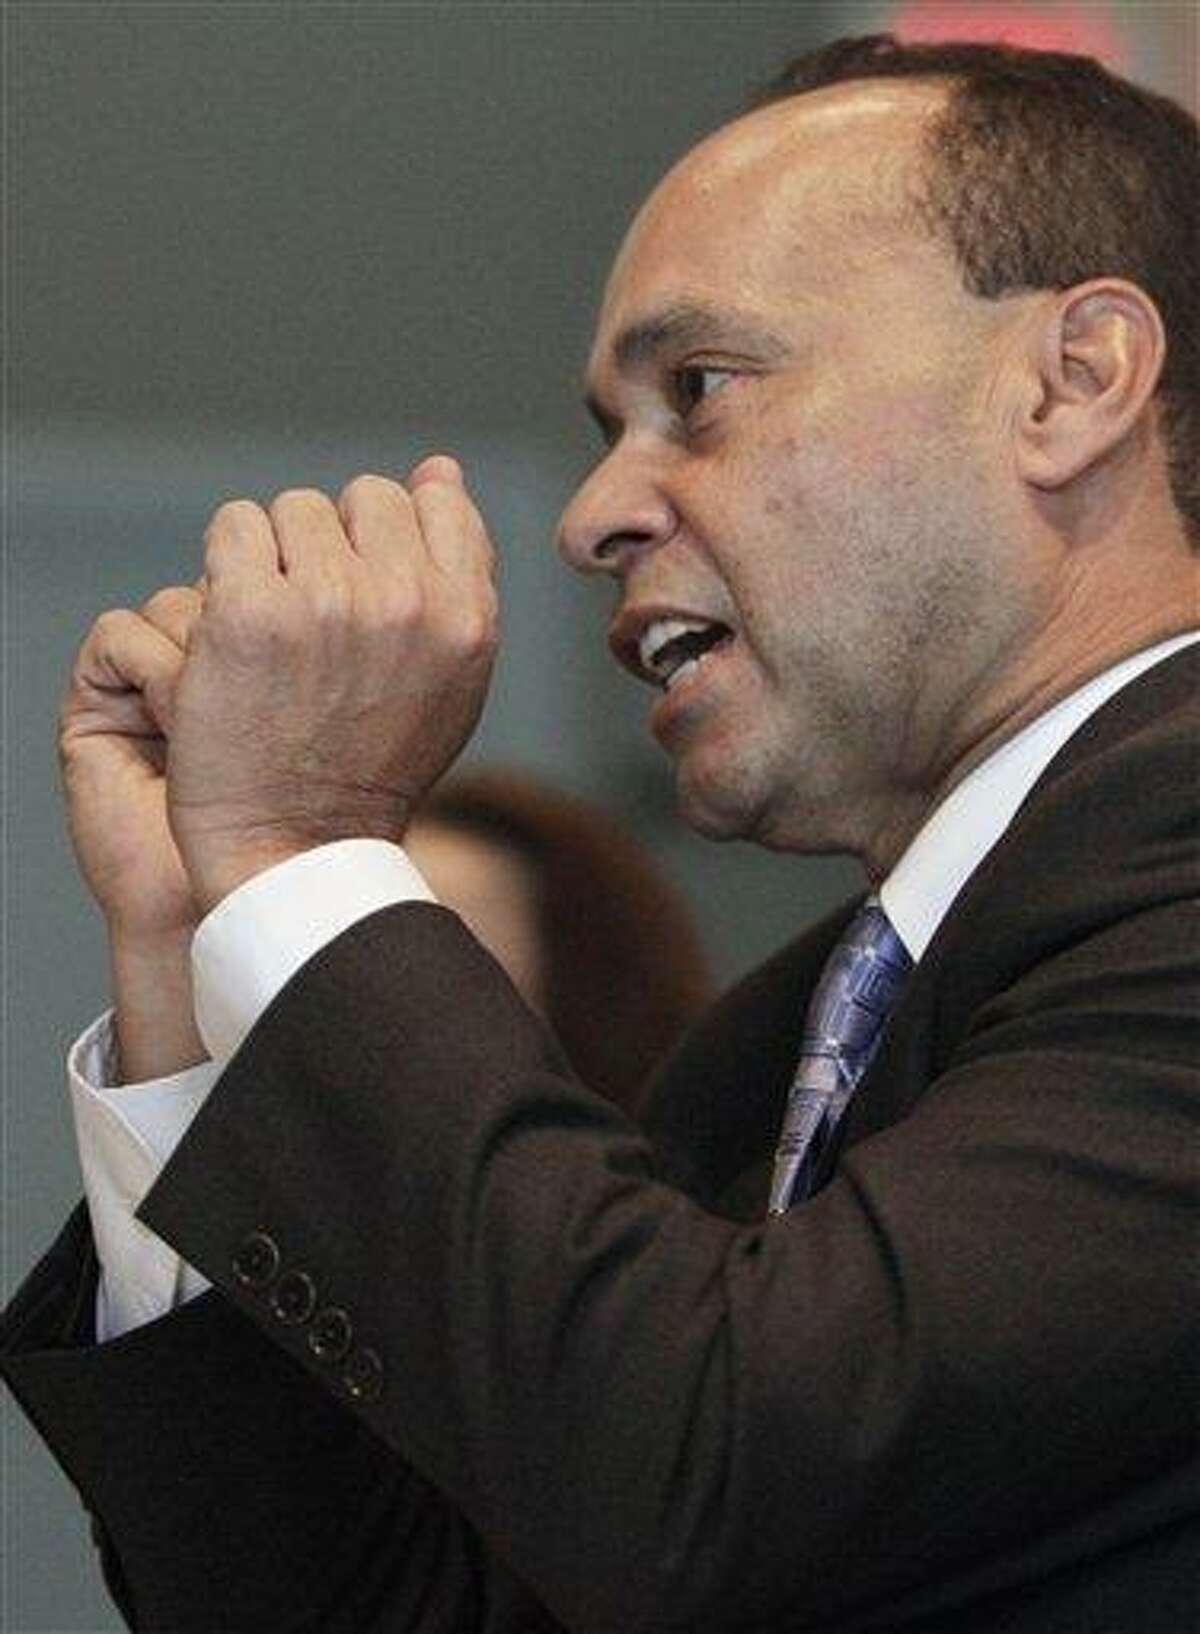 U.S. Rep. Luis Gutierrez describes how unsuspecting illegal immigrants are handcuffed when they show up for appointments with immigration officials in Mexico as he addresses the media along with Army National Guard Spc. Hector Nunez at a news conference, Monday, Dec. 6, 2010, in Chicago. Nunez is a 26-year-old native Chicagoan whose wife was brought to the U.S. illegally when she was six. After the two were married in 2005, she sought legal status, but was deported. Gutierrez says the case of the U.S. citizen soldier who's been separated from his illegal immigrant wife and U.S.-born child shows flaws in the immigration system. (AP Photo/M. Spencer Green)